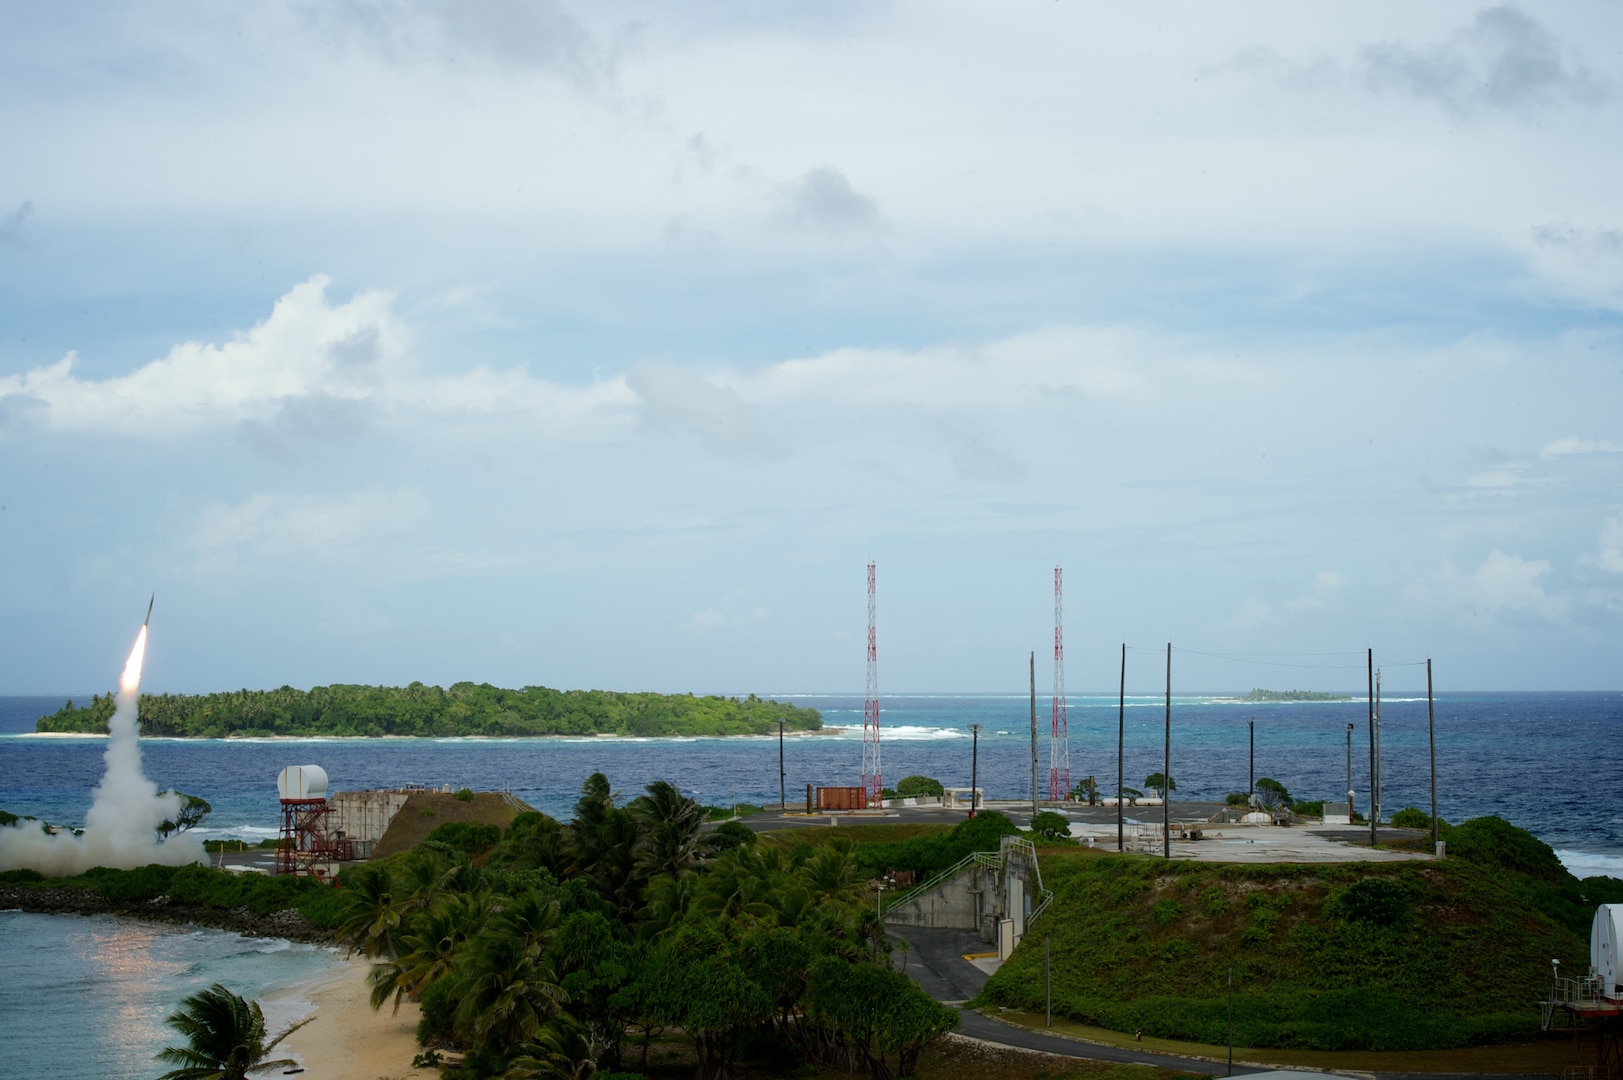 Terminal High Altitude Area Defense interceptor missile launches from Meck Island to intercept ballistic missile target during Missile Defense Agency integrated flight test, Republic of the Marshall Islands, October 25, 2012 (U.S. Navy)